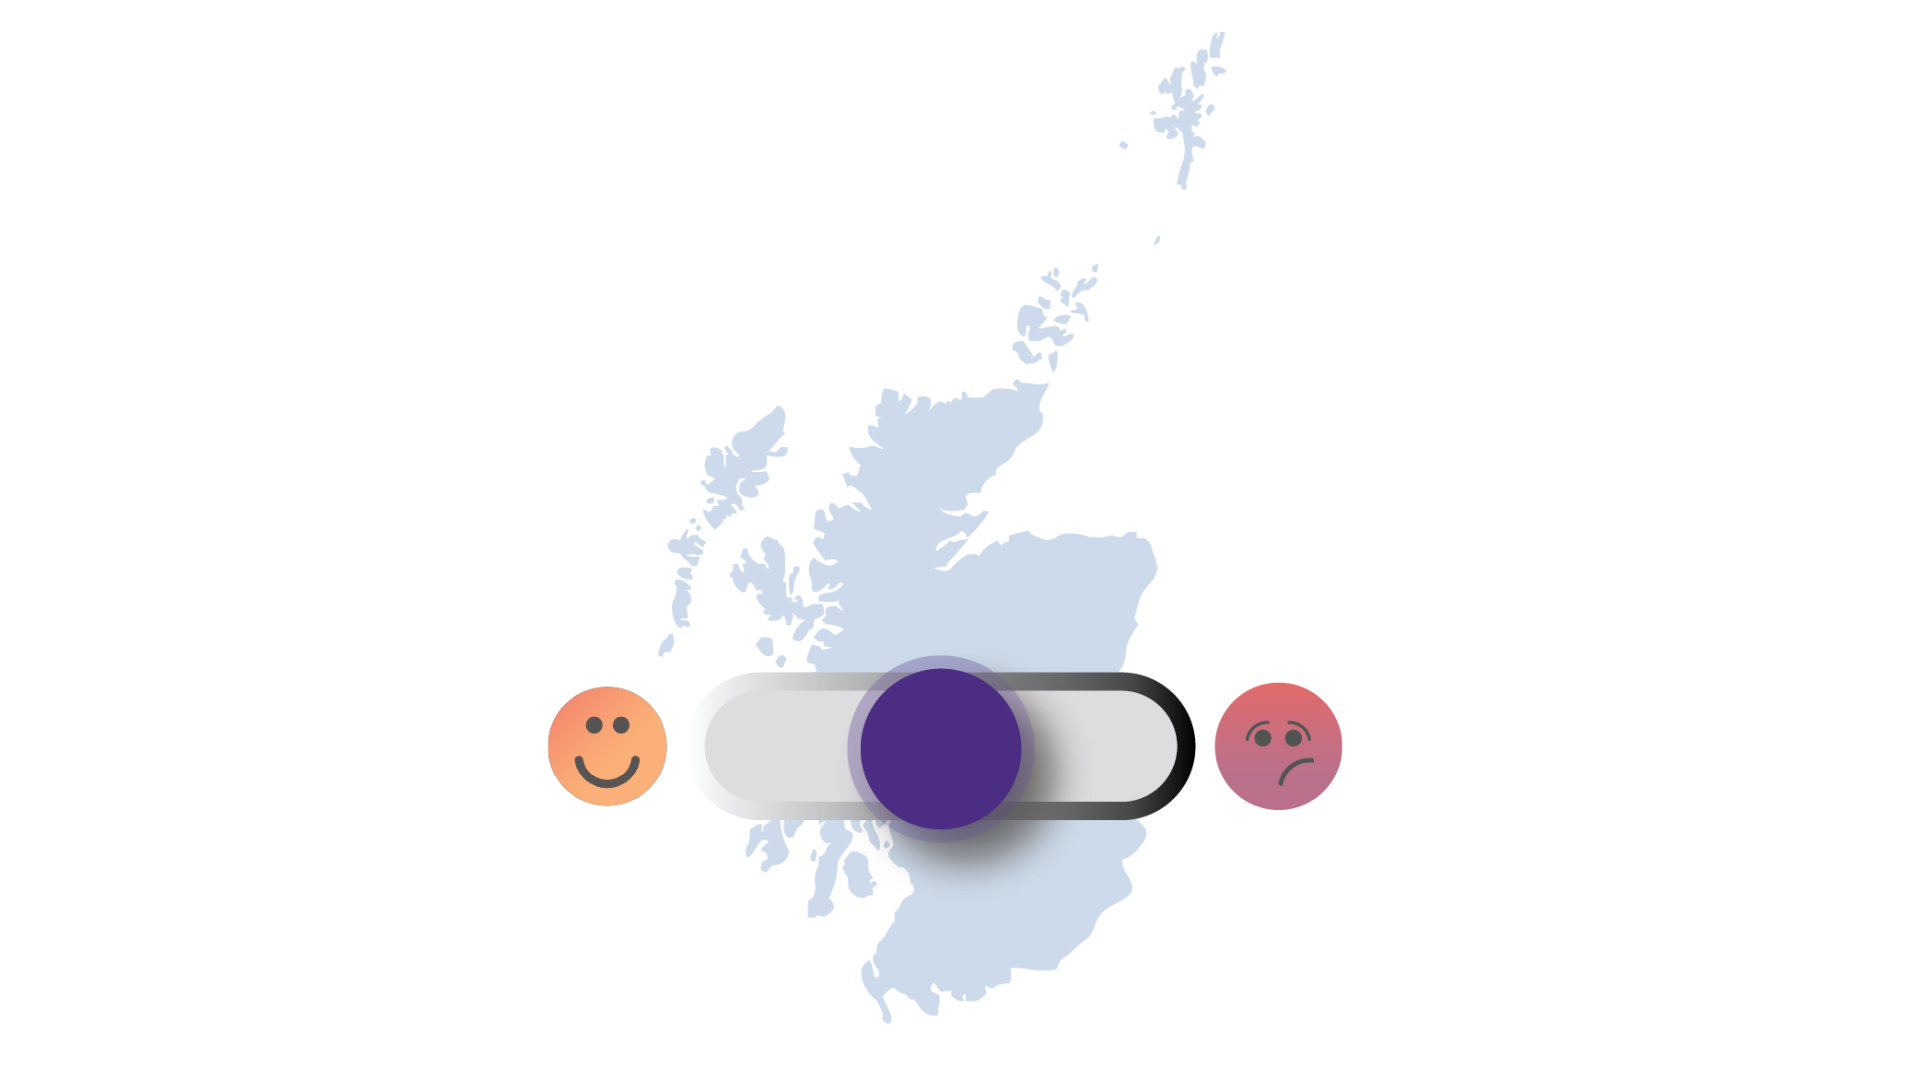 Content and upset emoji at either end of a sliding button laid over a map of Scotland.